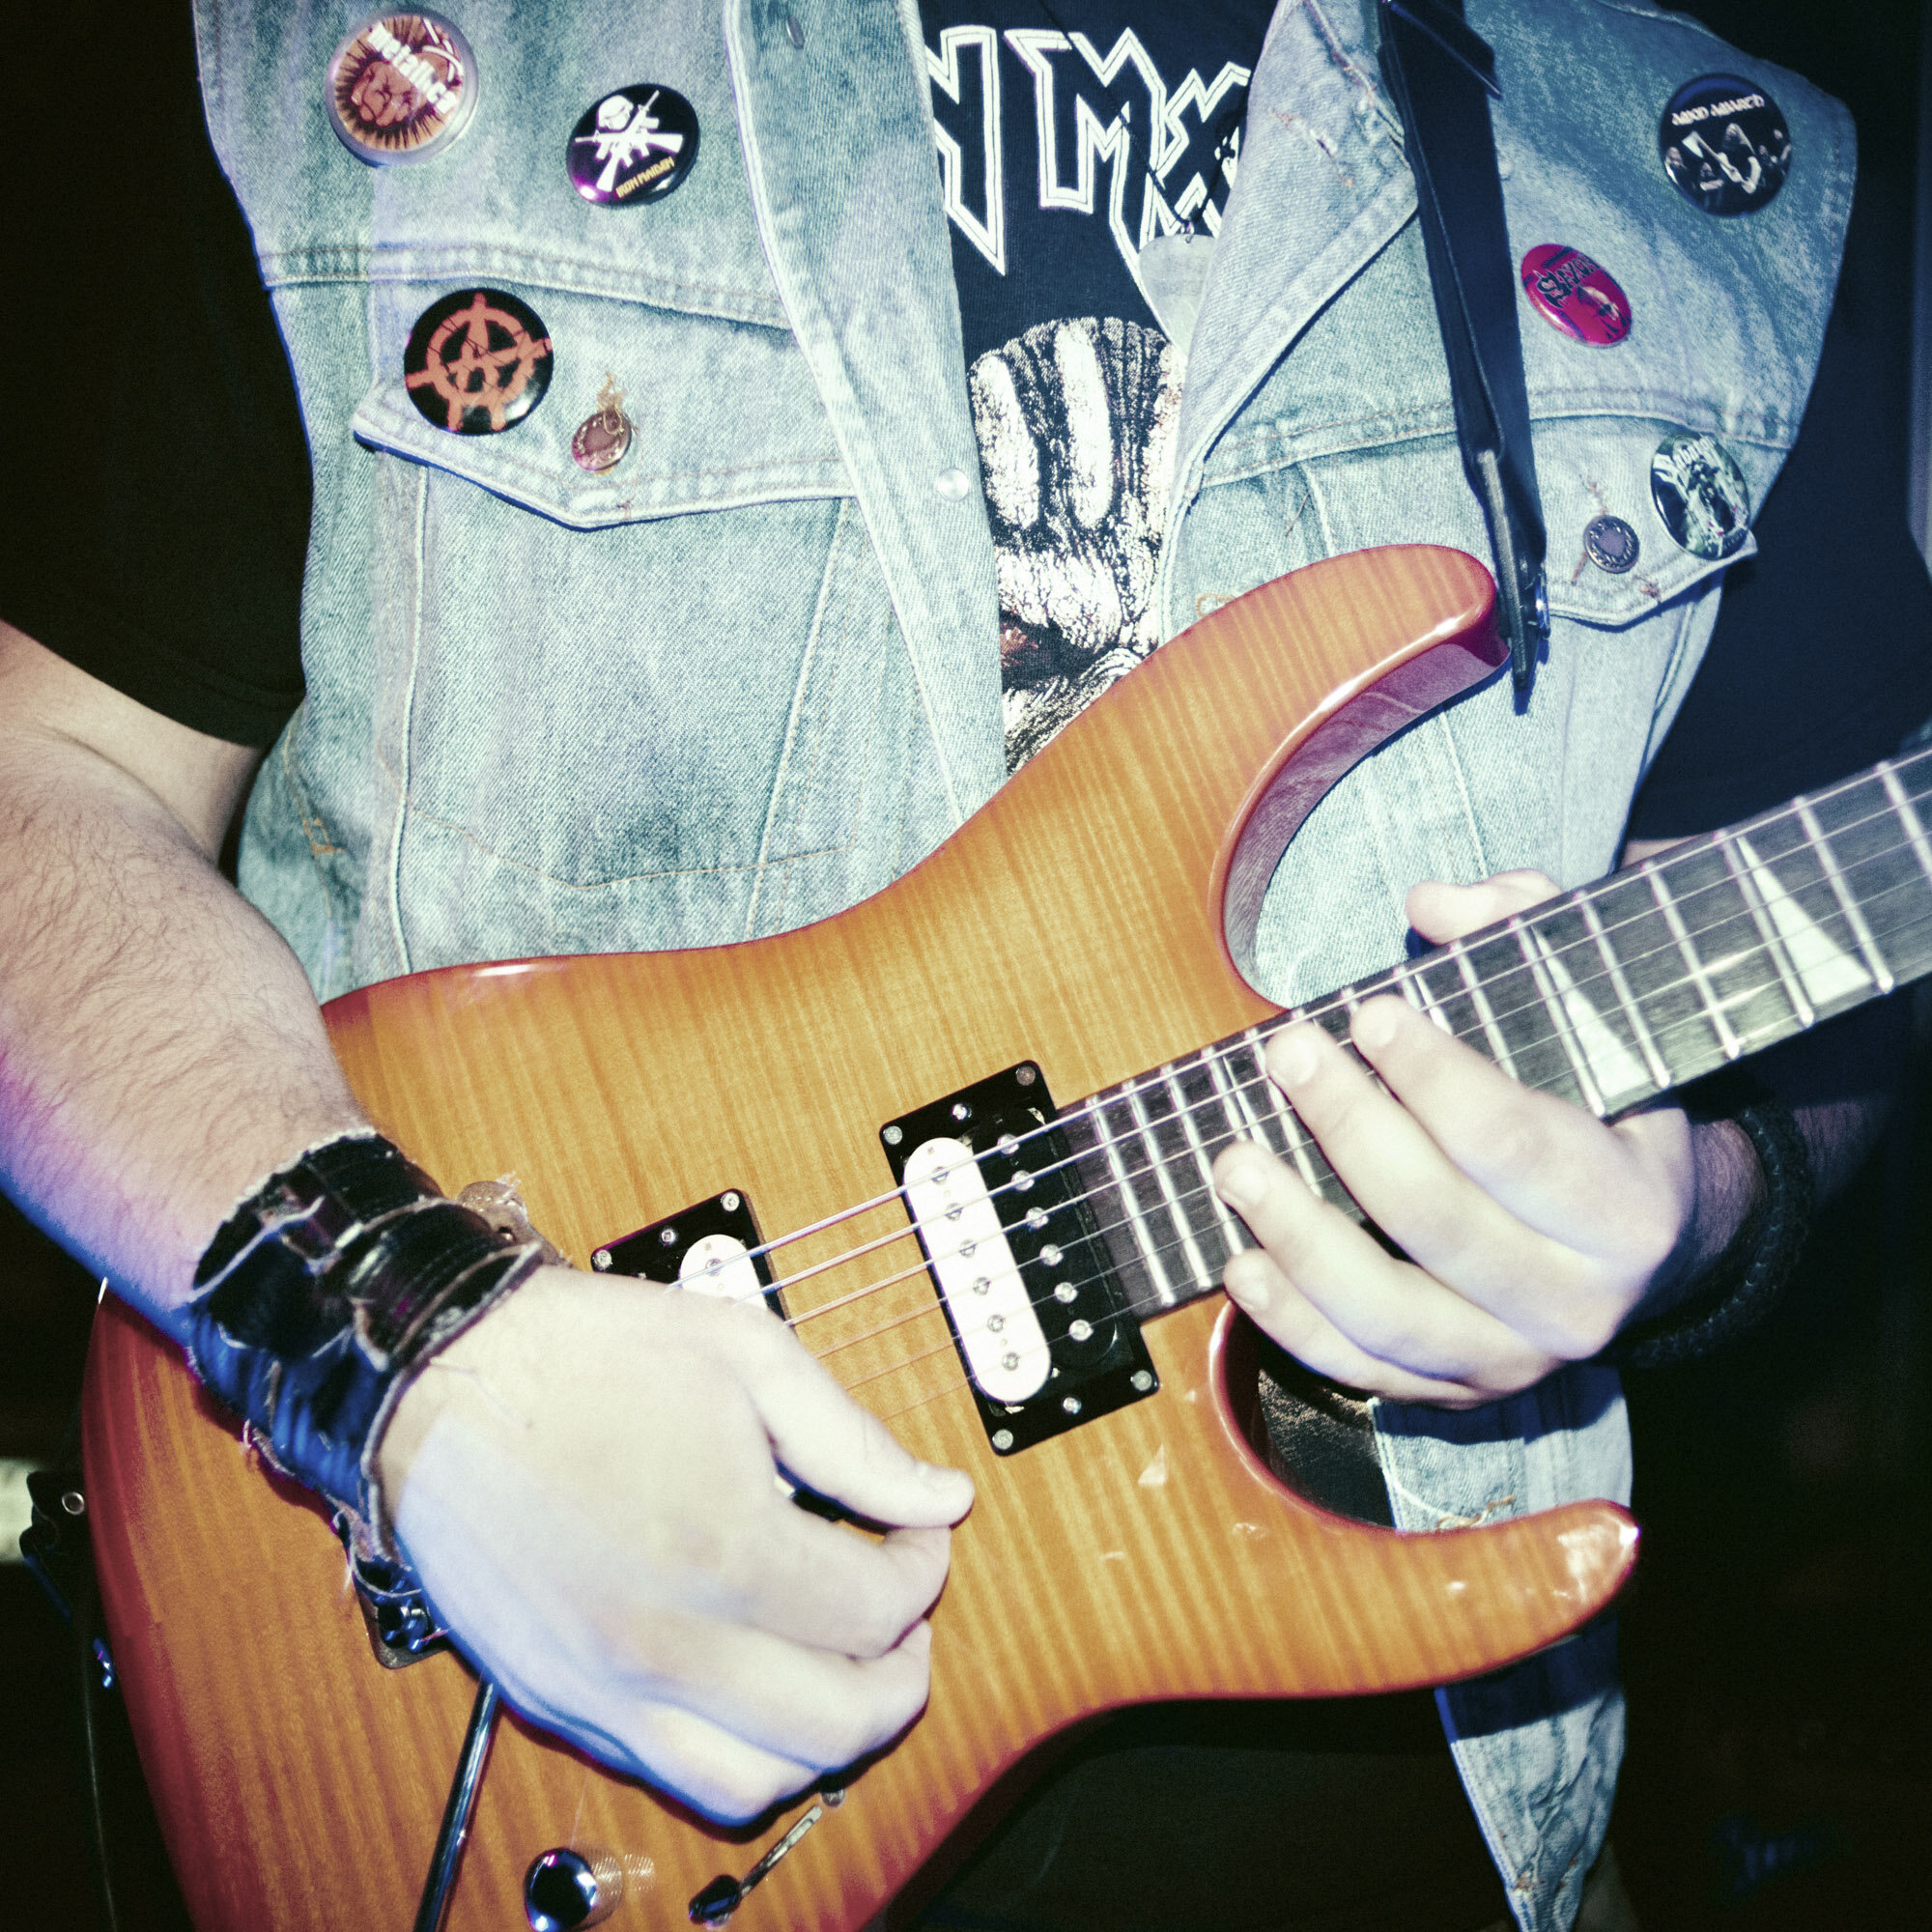  The guitar player of a multi-ethnic rock band wears a denim jacket with badges during the Mitrovica Rock School concert in the Serbian enclave of Gracanica, Kosovo, on March 25, 2017. 